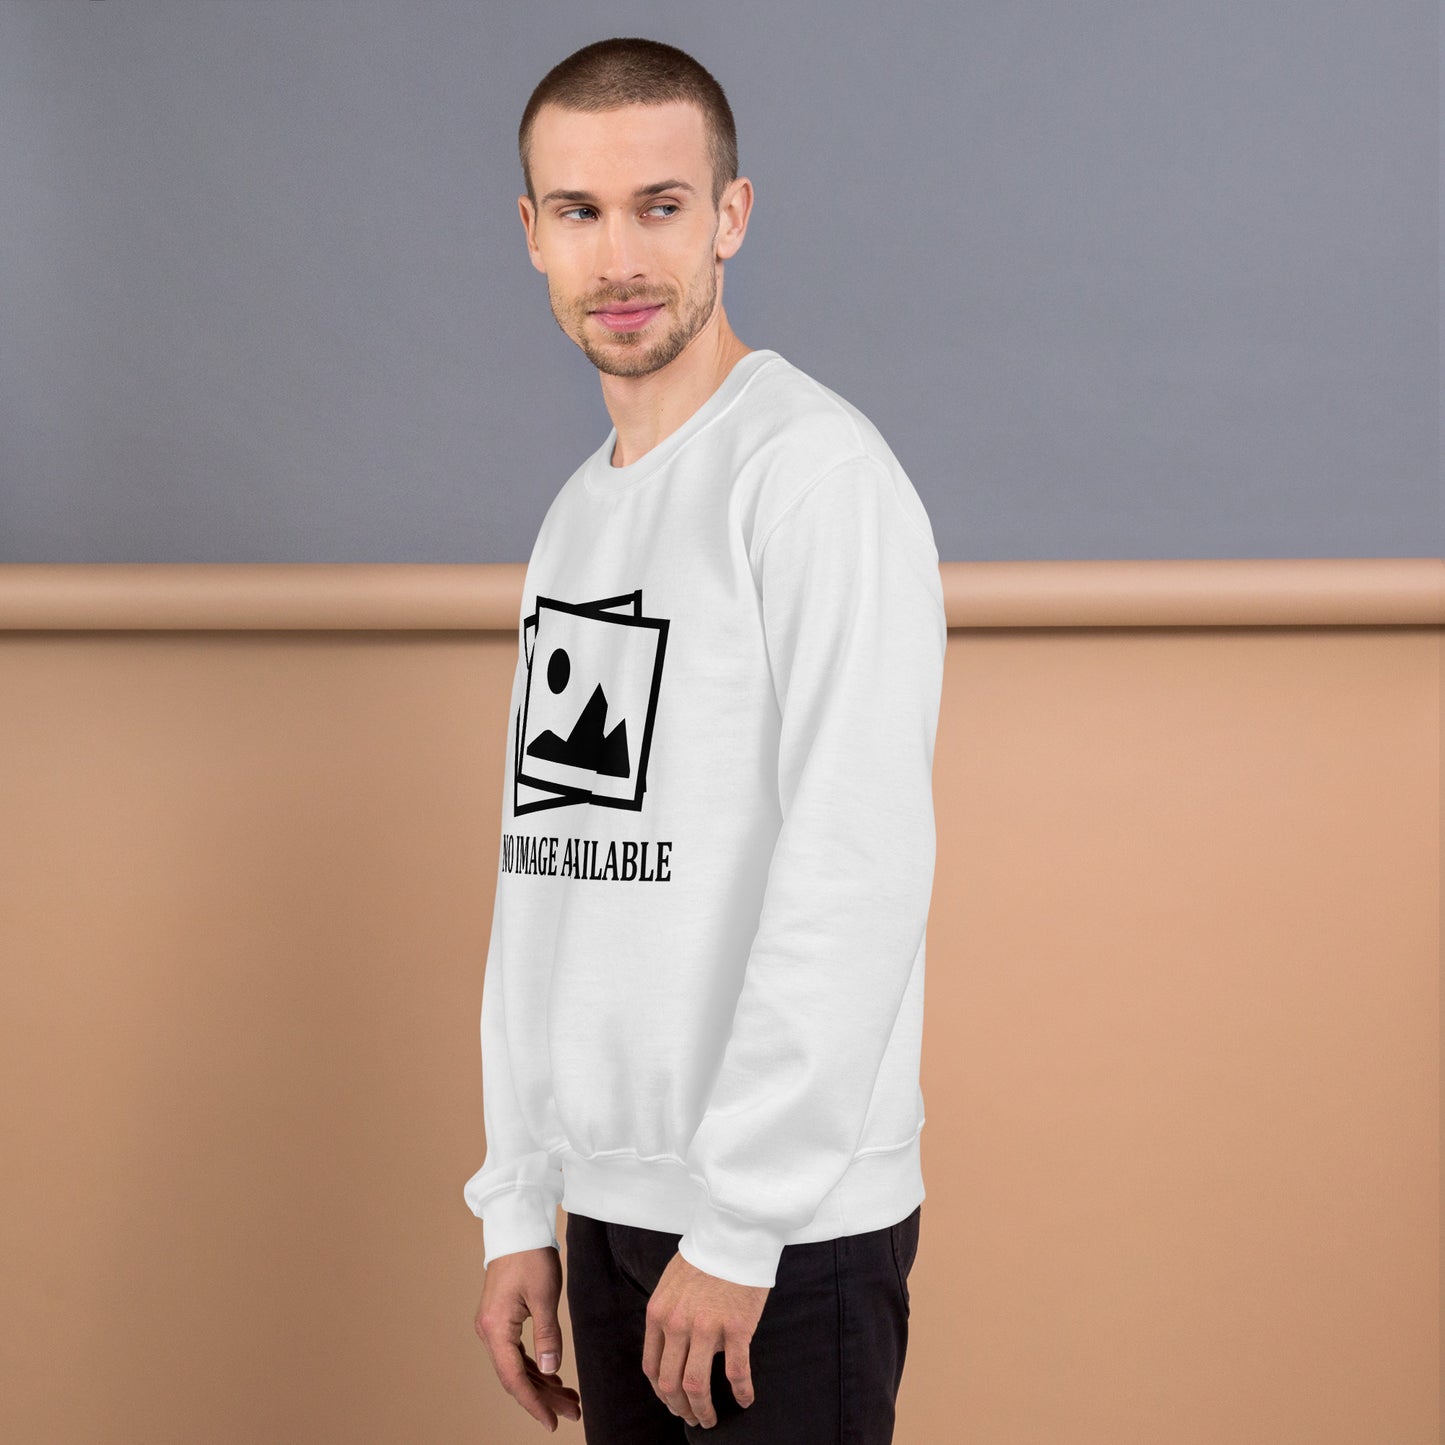 Men with white sweatshirt with image and text "no image available"